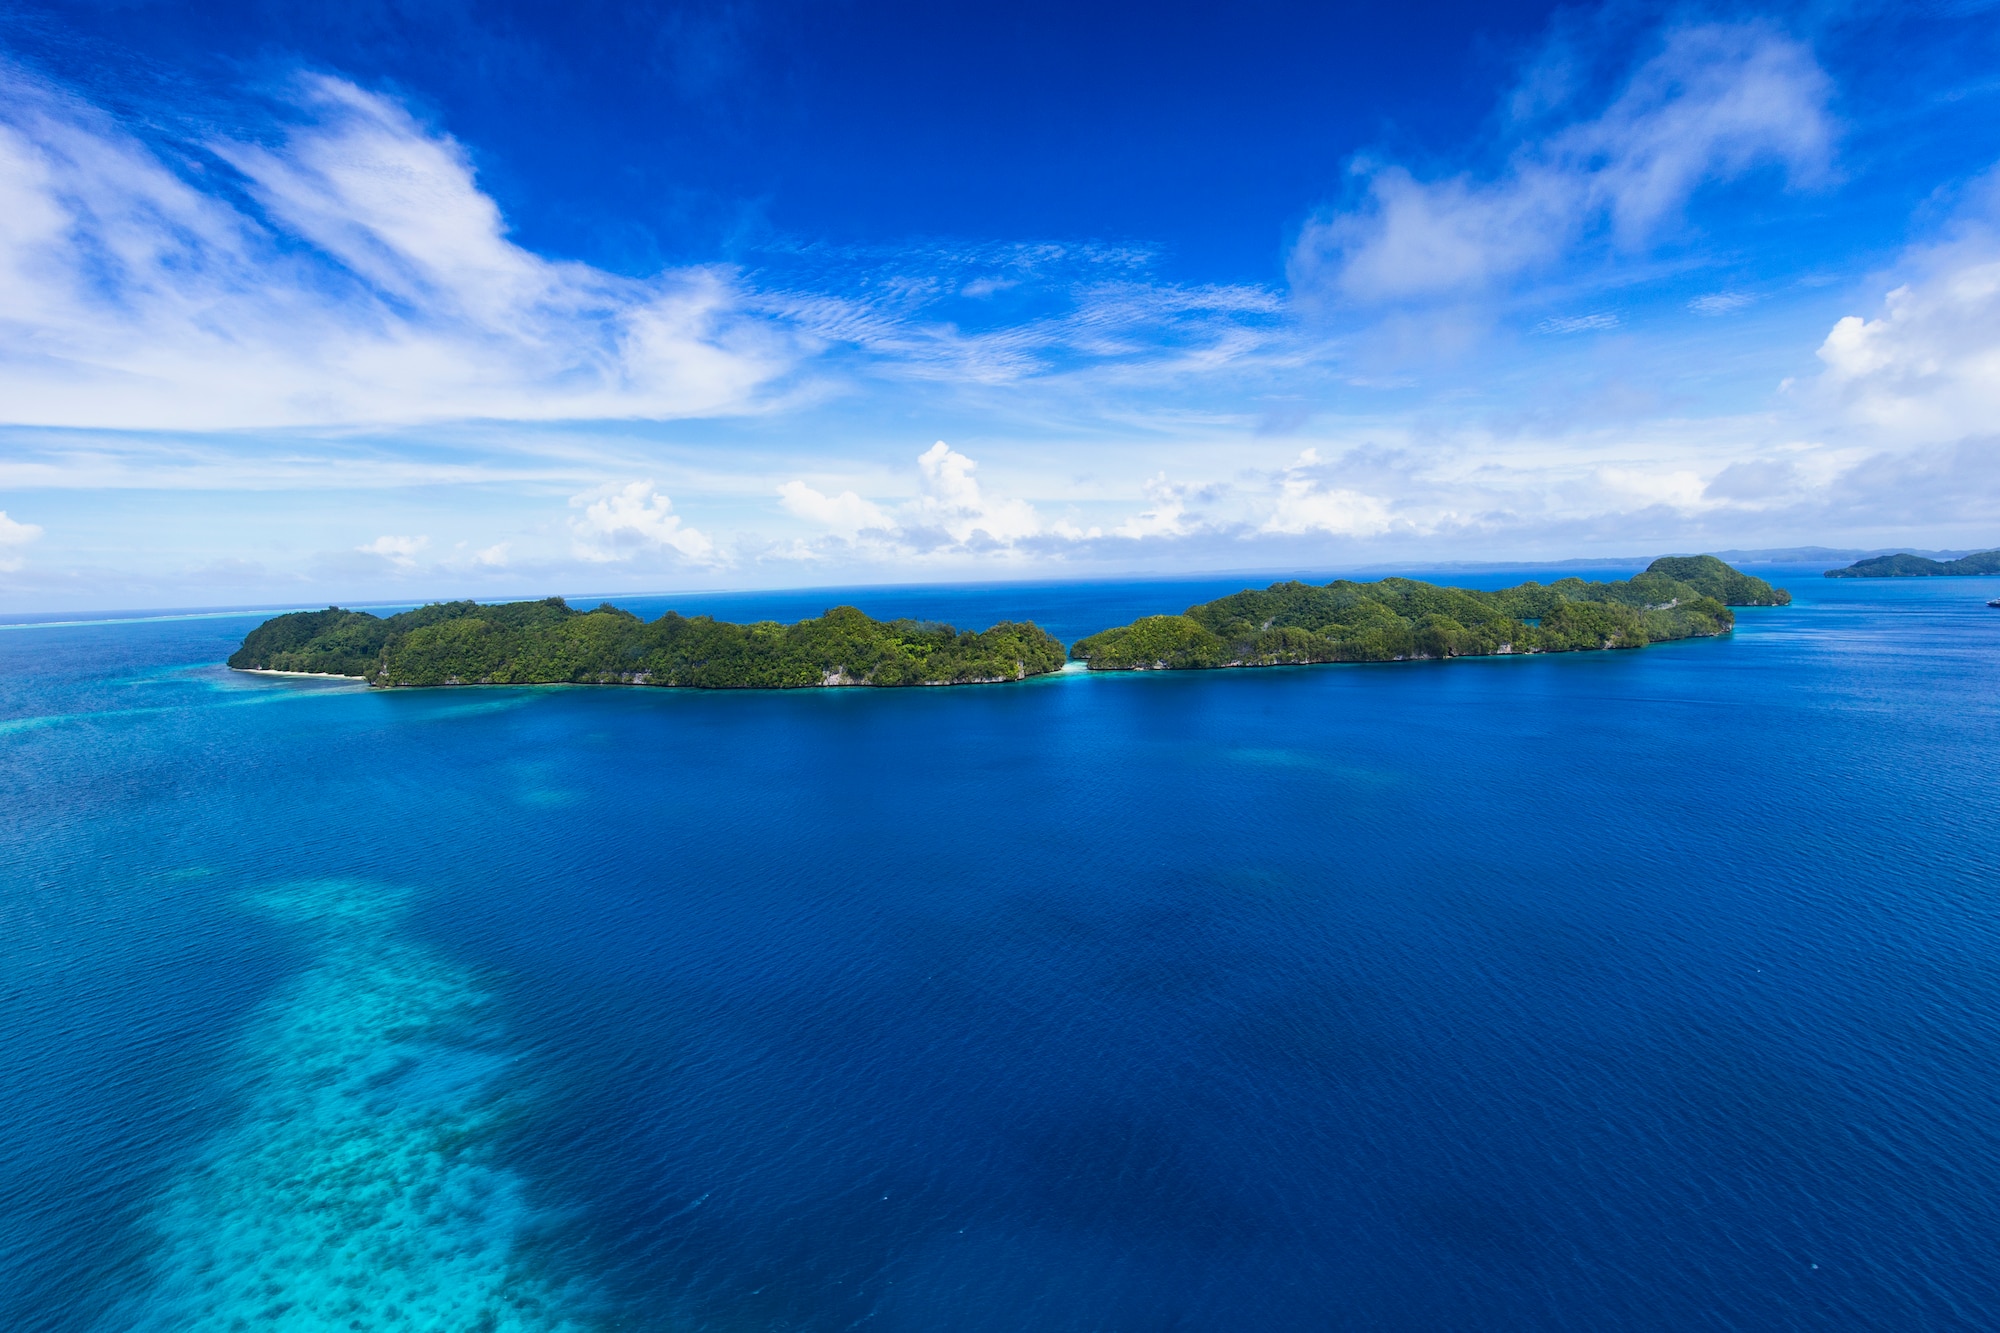 An island in Republic of Palau, Dec. 11, 2015, during Operation Christmas Drop 2015. This year marks the 64th year of Operation Christmas Drop, which began in 1952, and is the first trilateral execution of the event with support from Japan Air Self-Defense Force and Royal Australian Air Force C-130s. (U.S. Air Force photo by Osakabe Yasuo/Released)